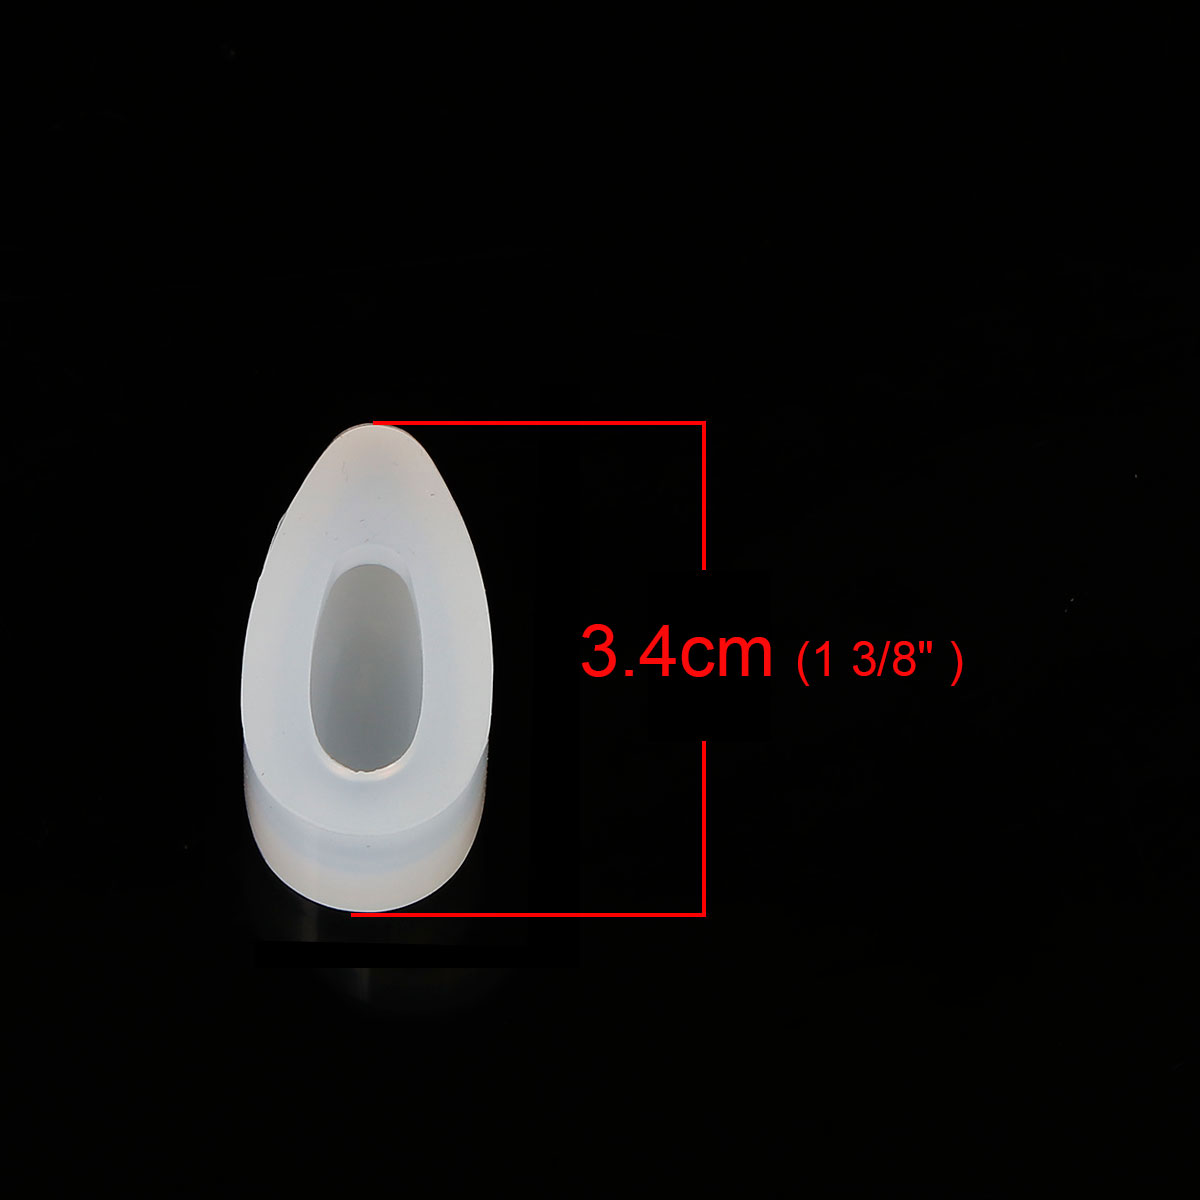 Picture of Silicone Resin Mold For Jewelry Making Drop White 31mm x 16mm, 1 Piece